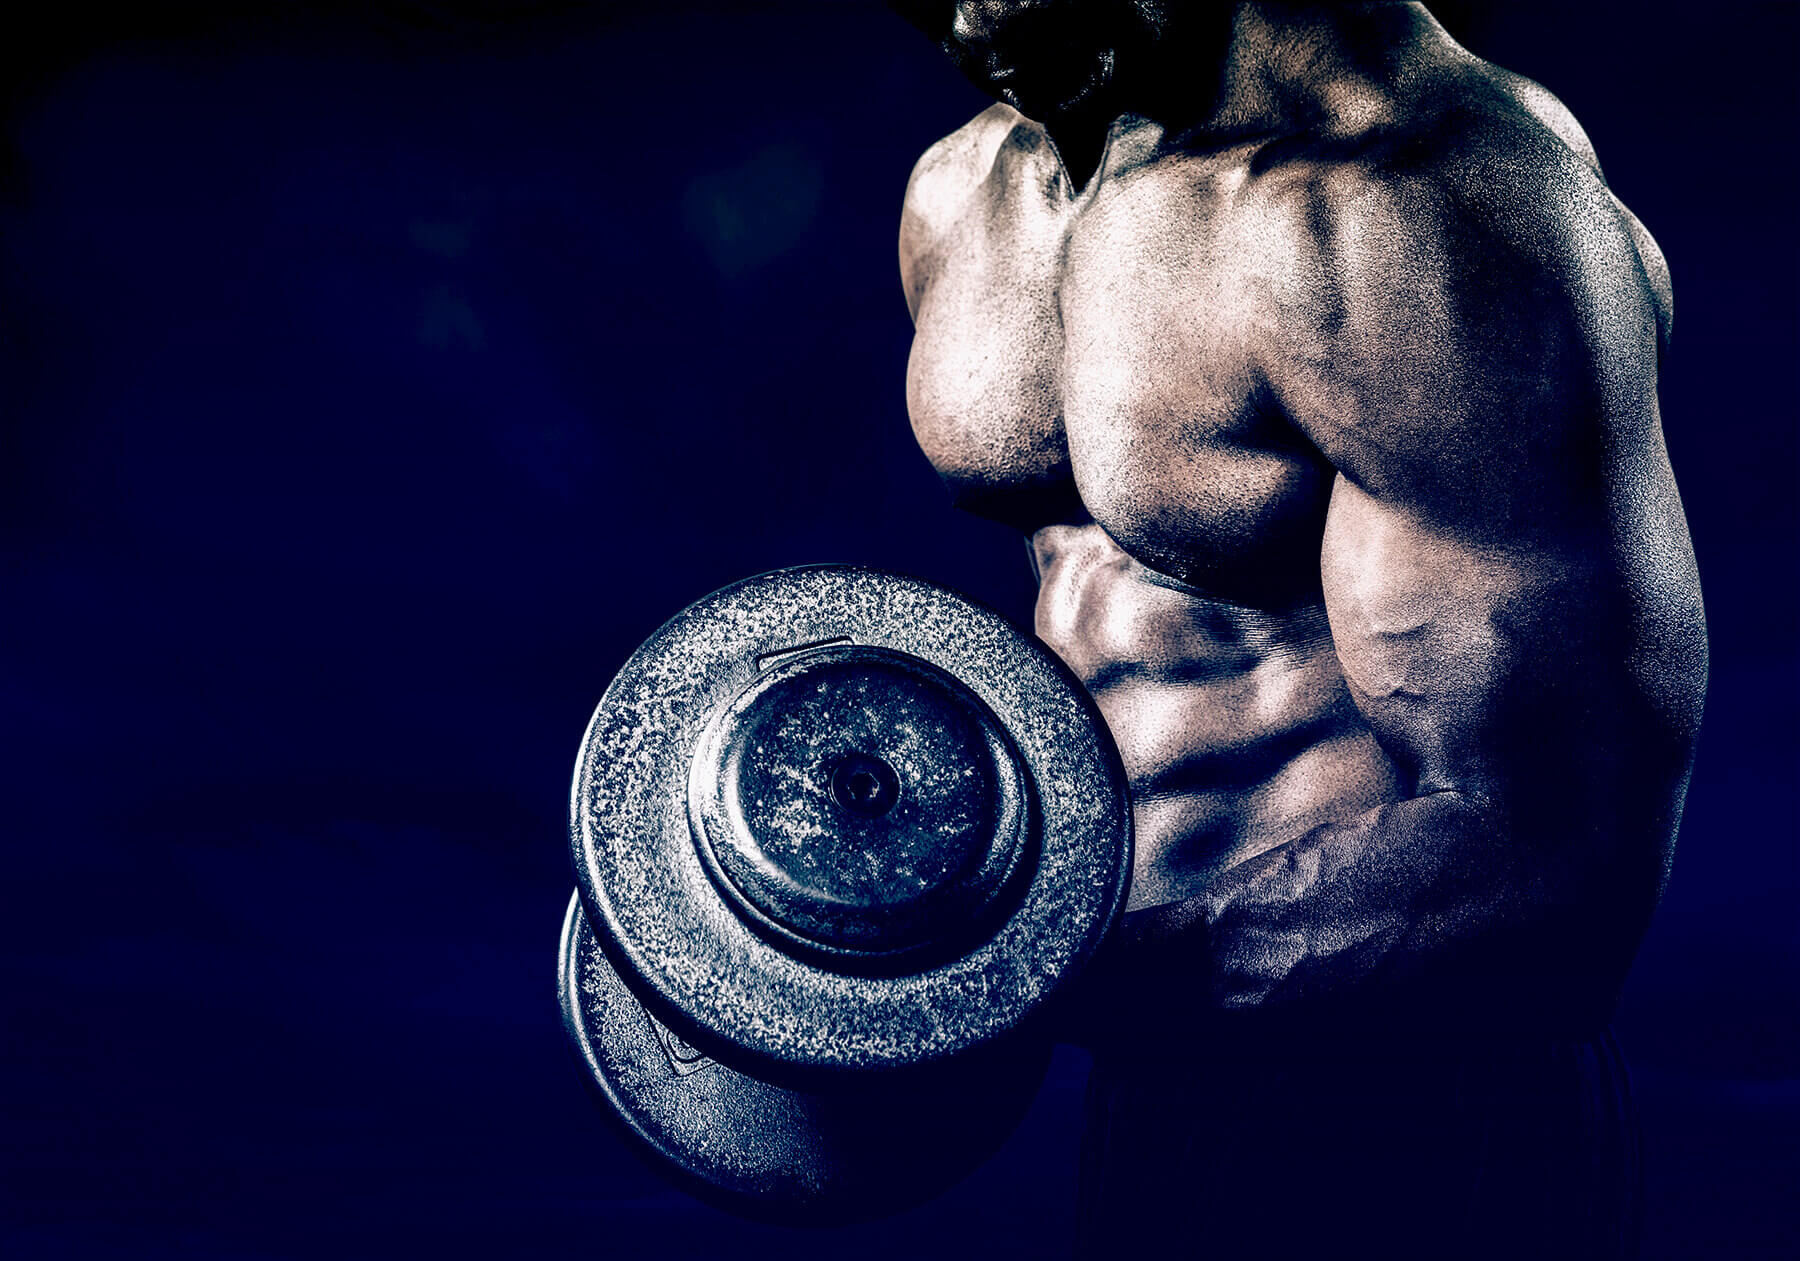 REPS: The effects of preparing for a natural bodybuilding show on the body